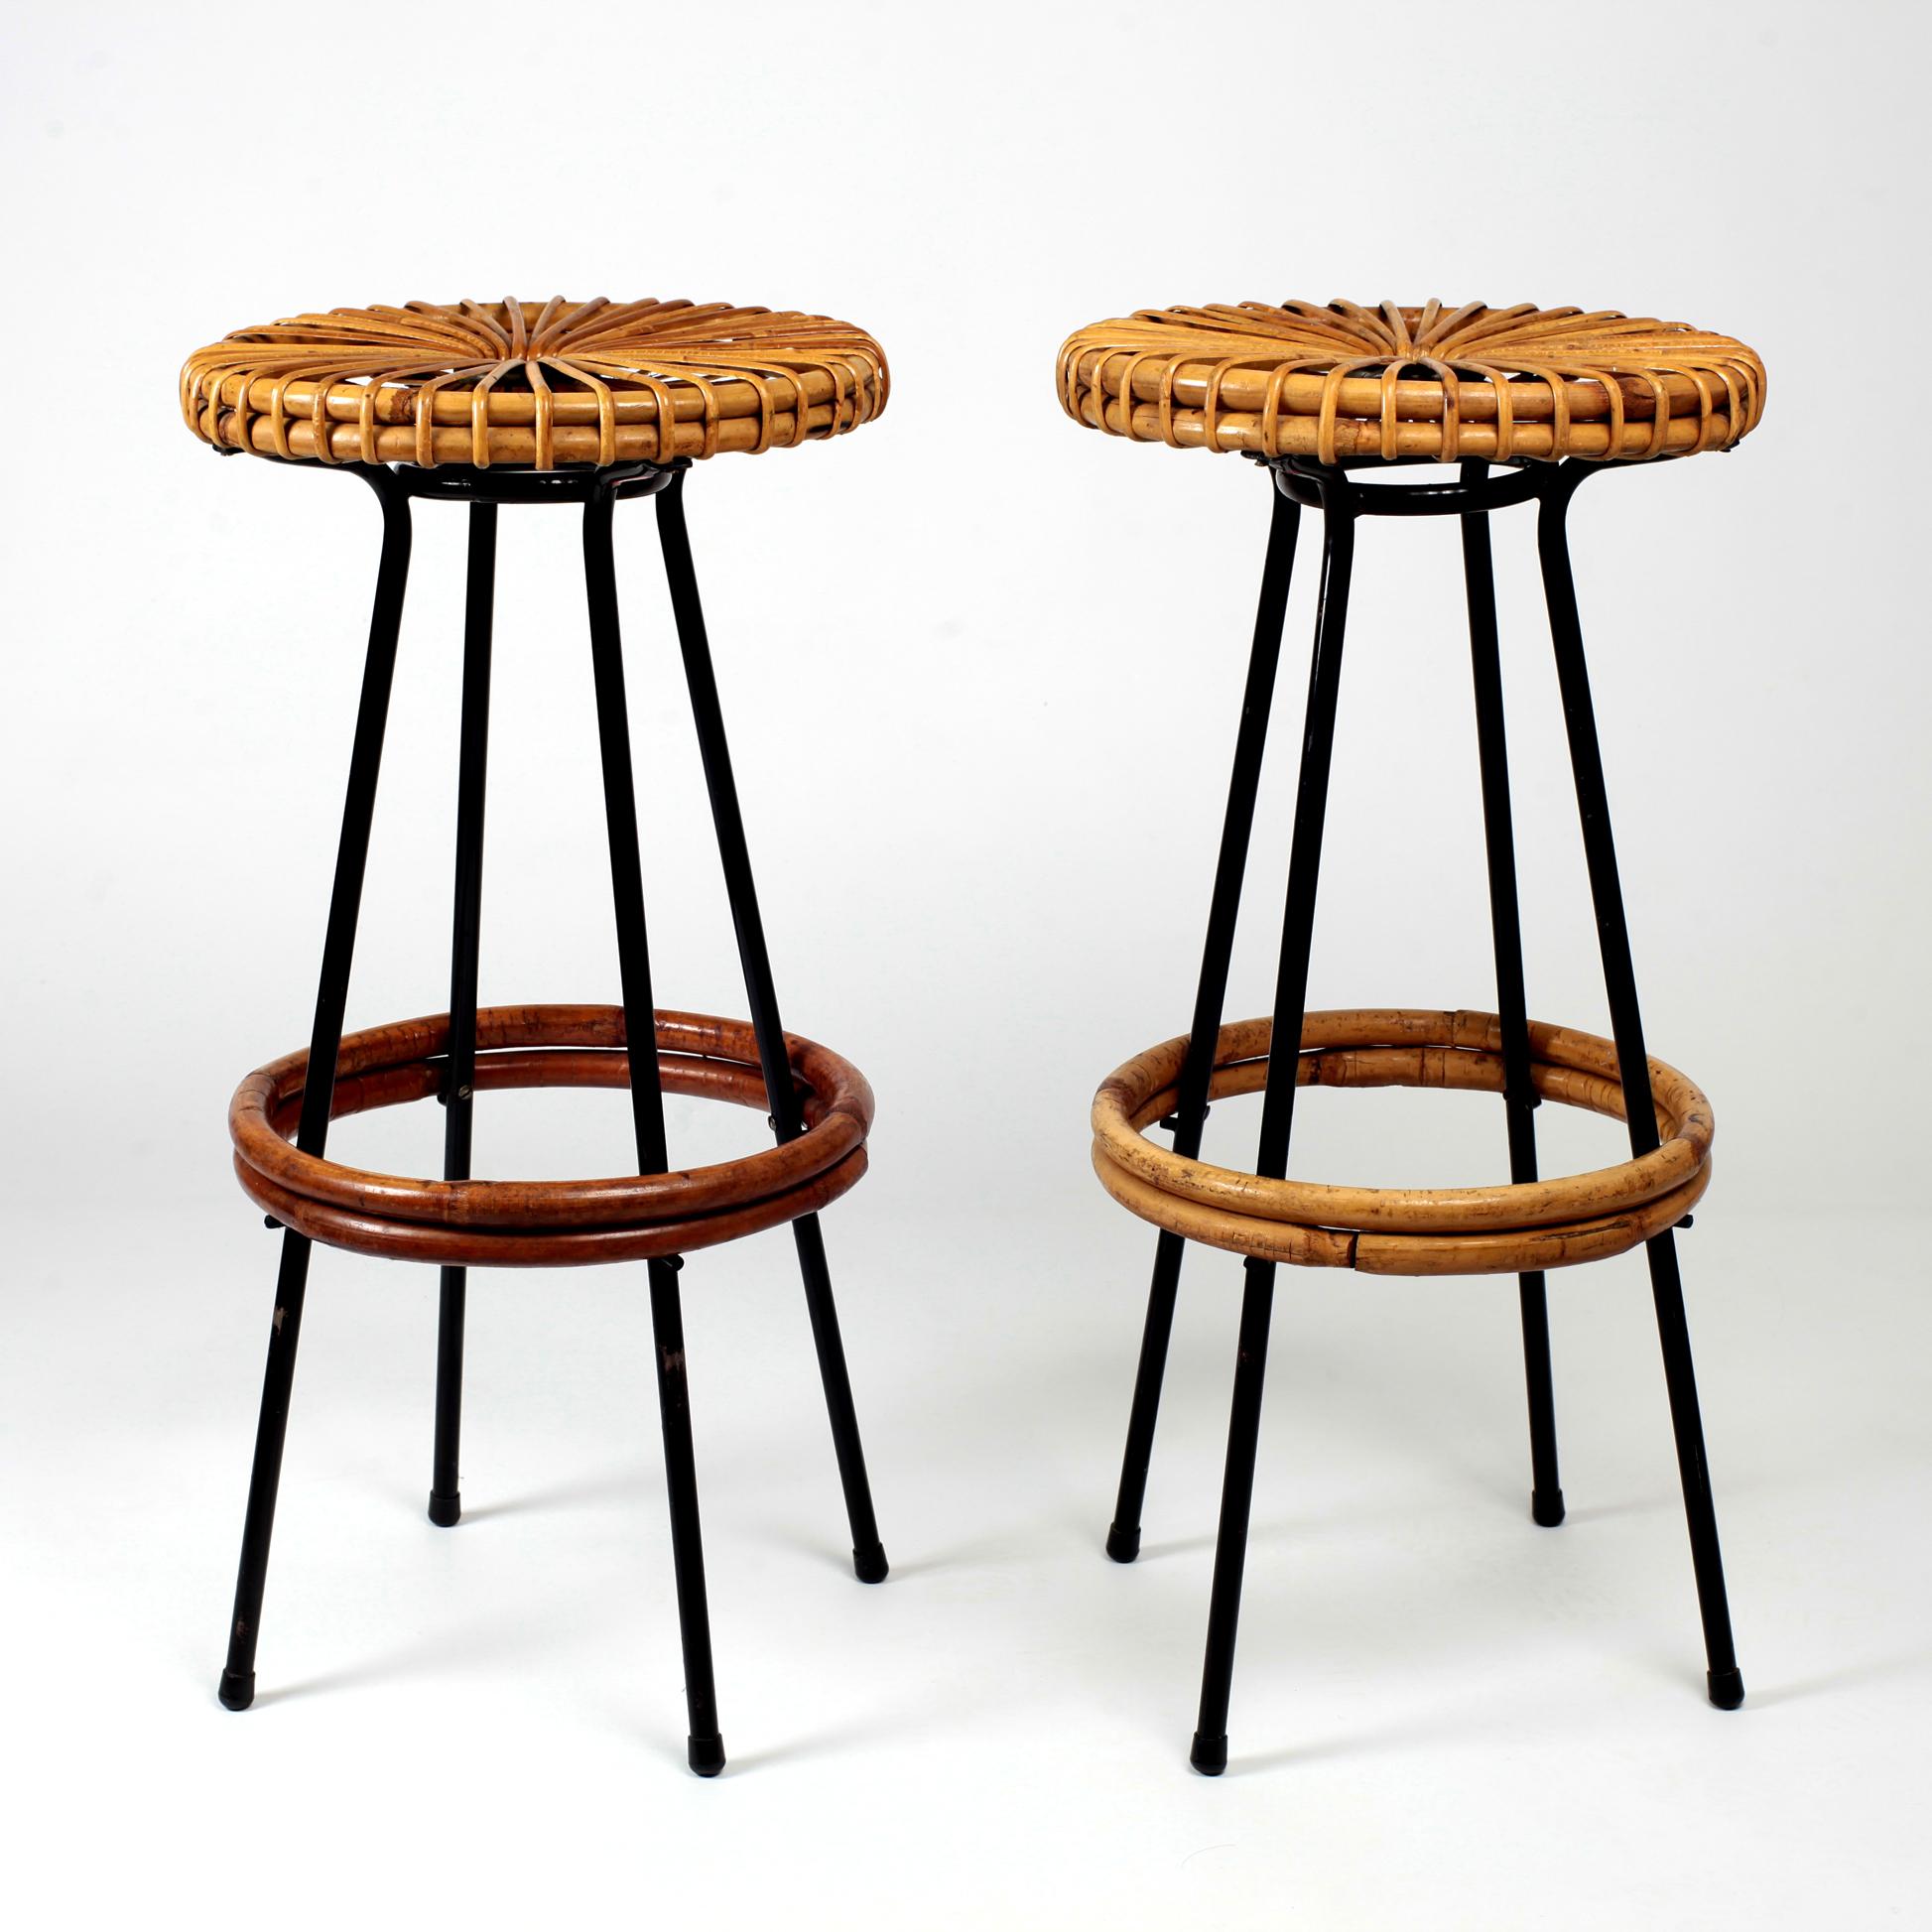 Elegant rattan bar stool designed by Dirk Van Sliedrecht in the 1950s for Noordwolde, Netherlands 
Rattan seat and black metal structure
Counter height
Good vintage condition and nice patina.